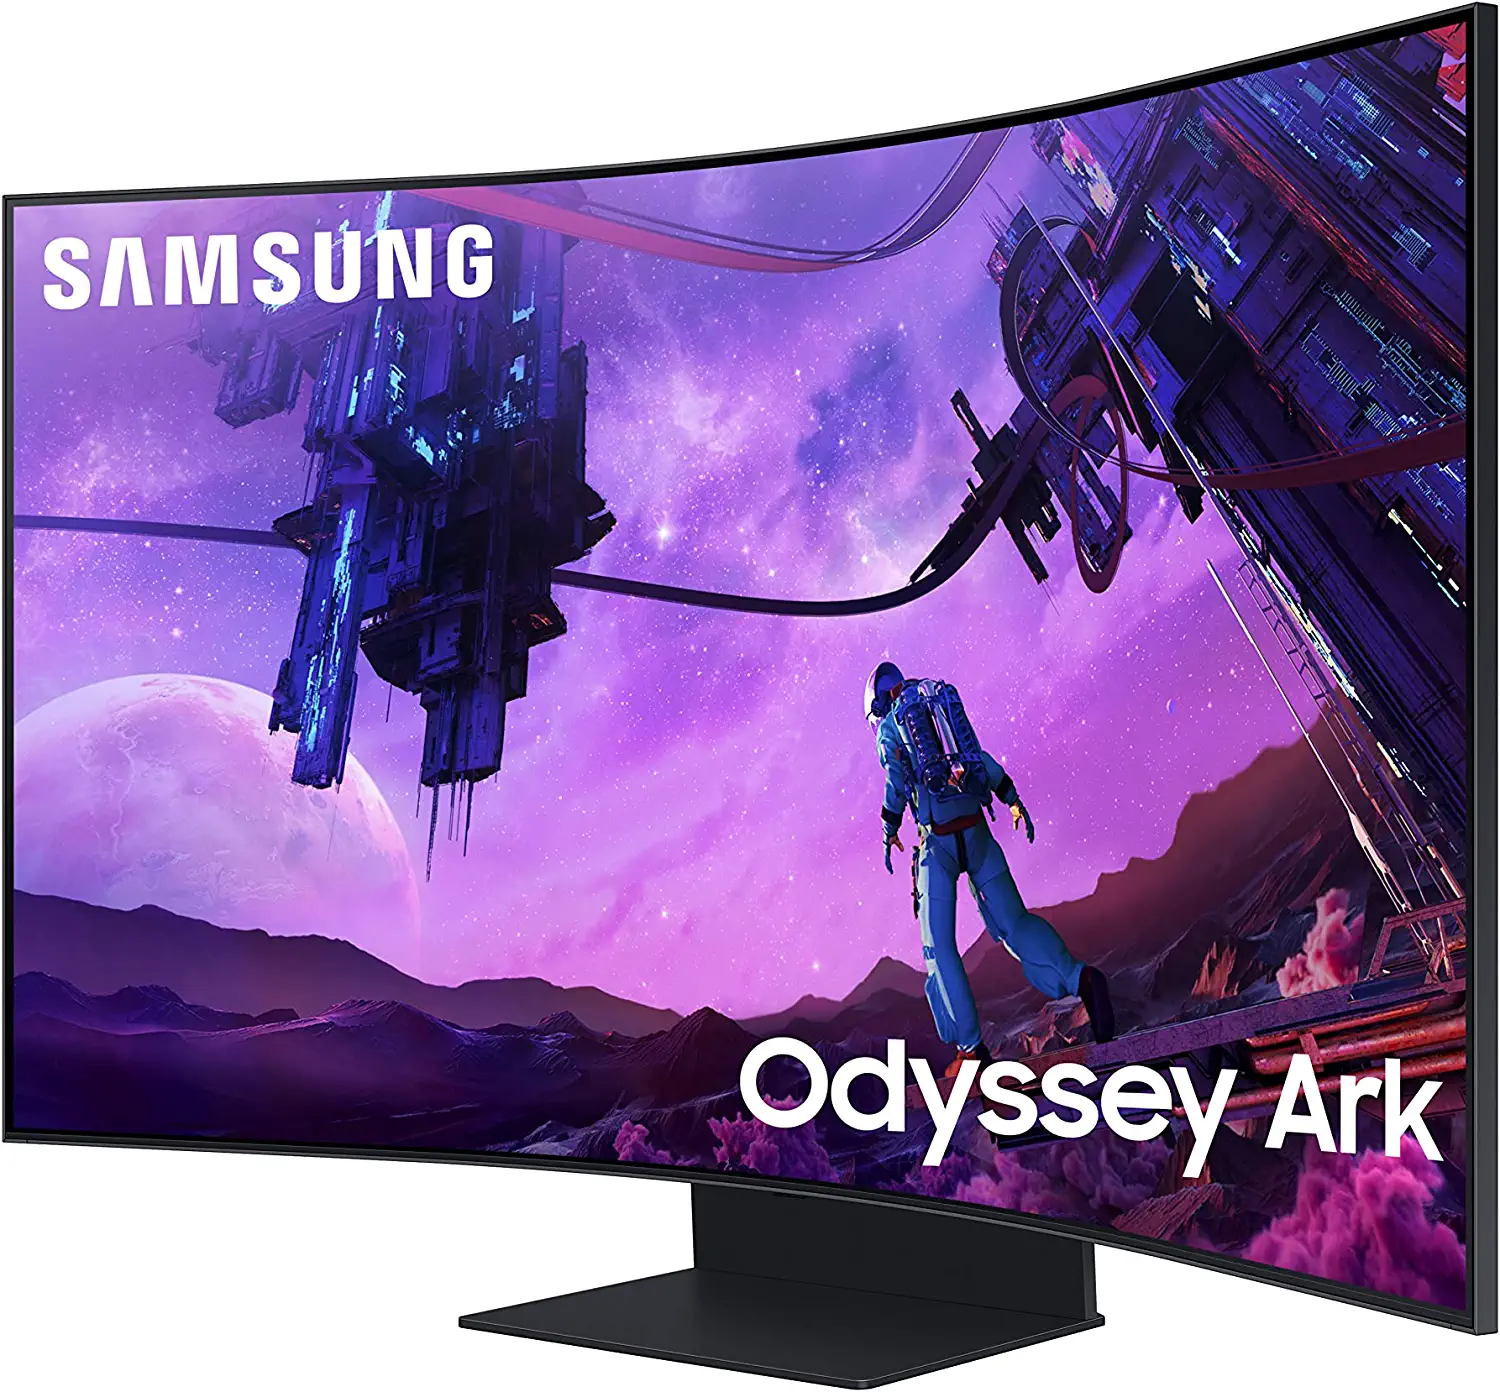 Review of the Samsung Odyssey Ark: A Powerhouse Gaming Monitor